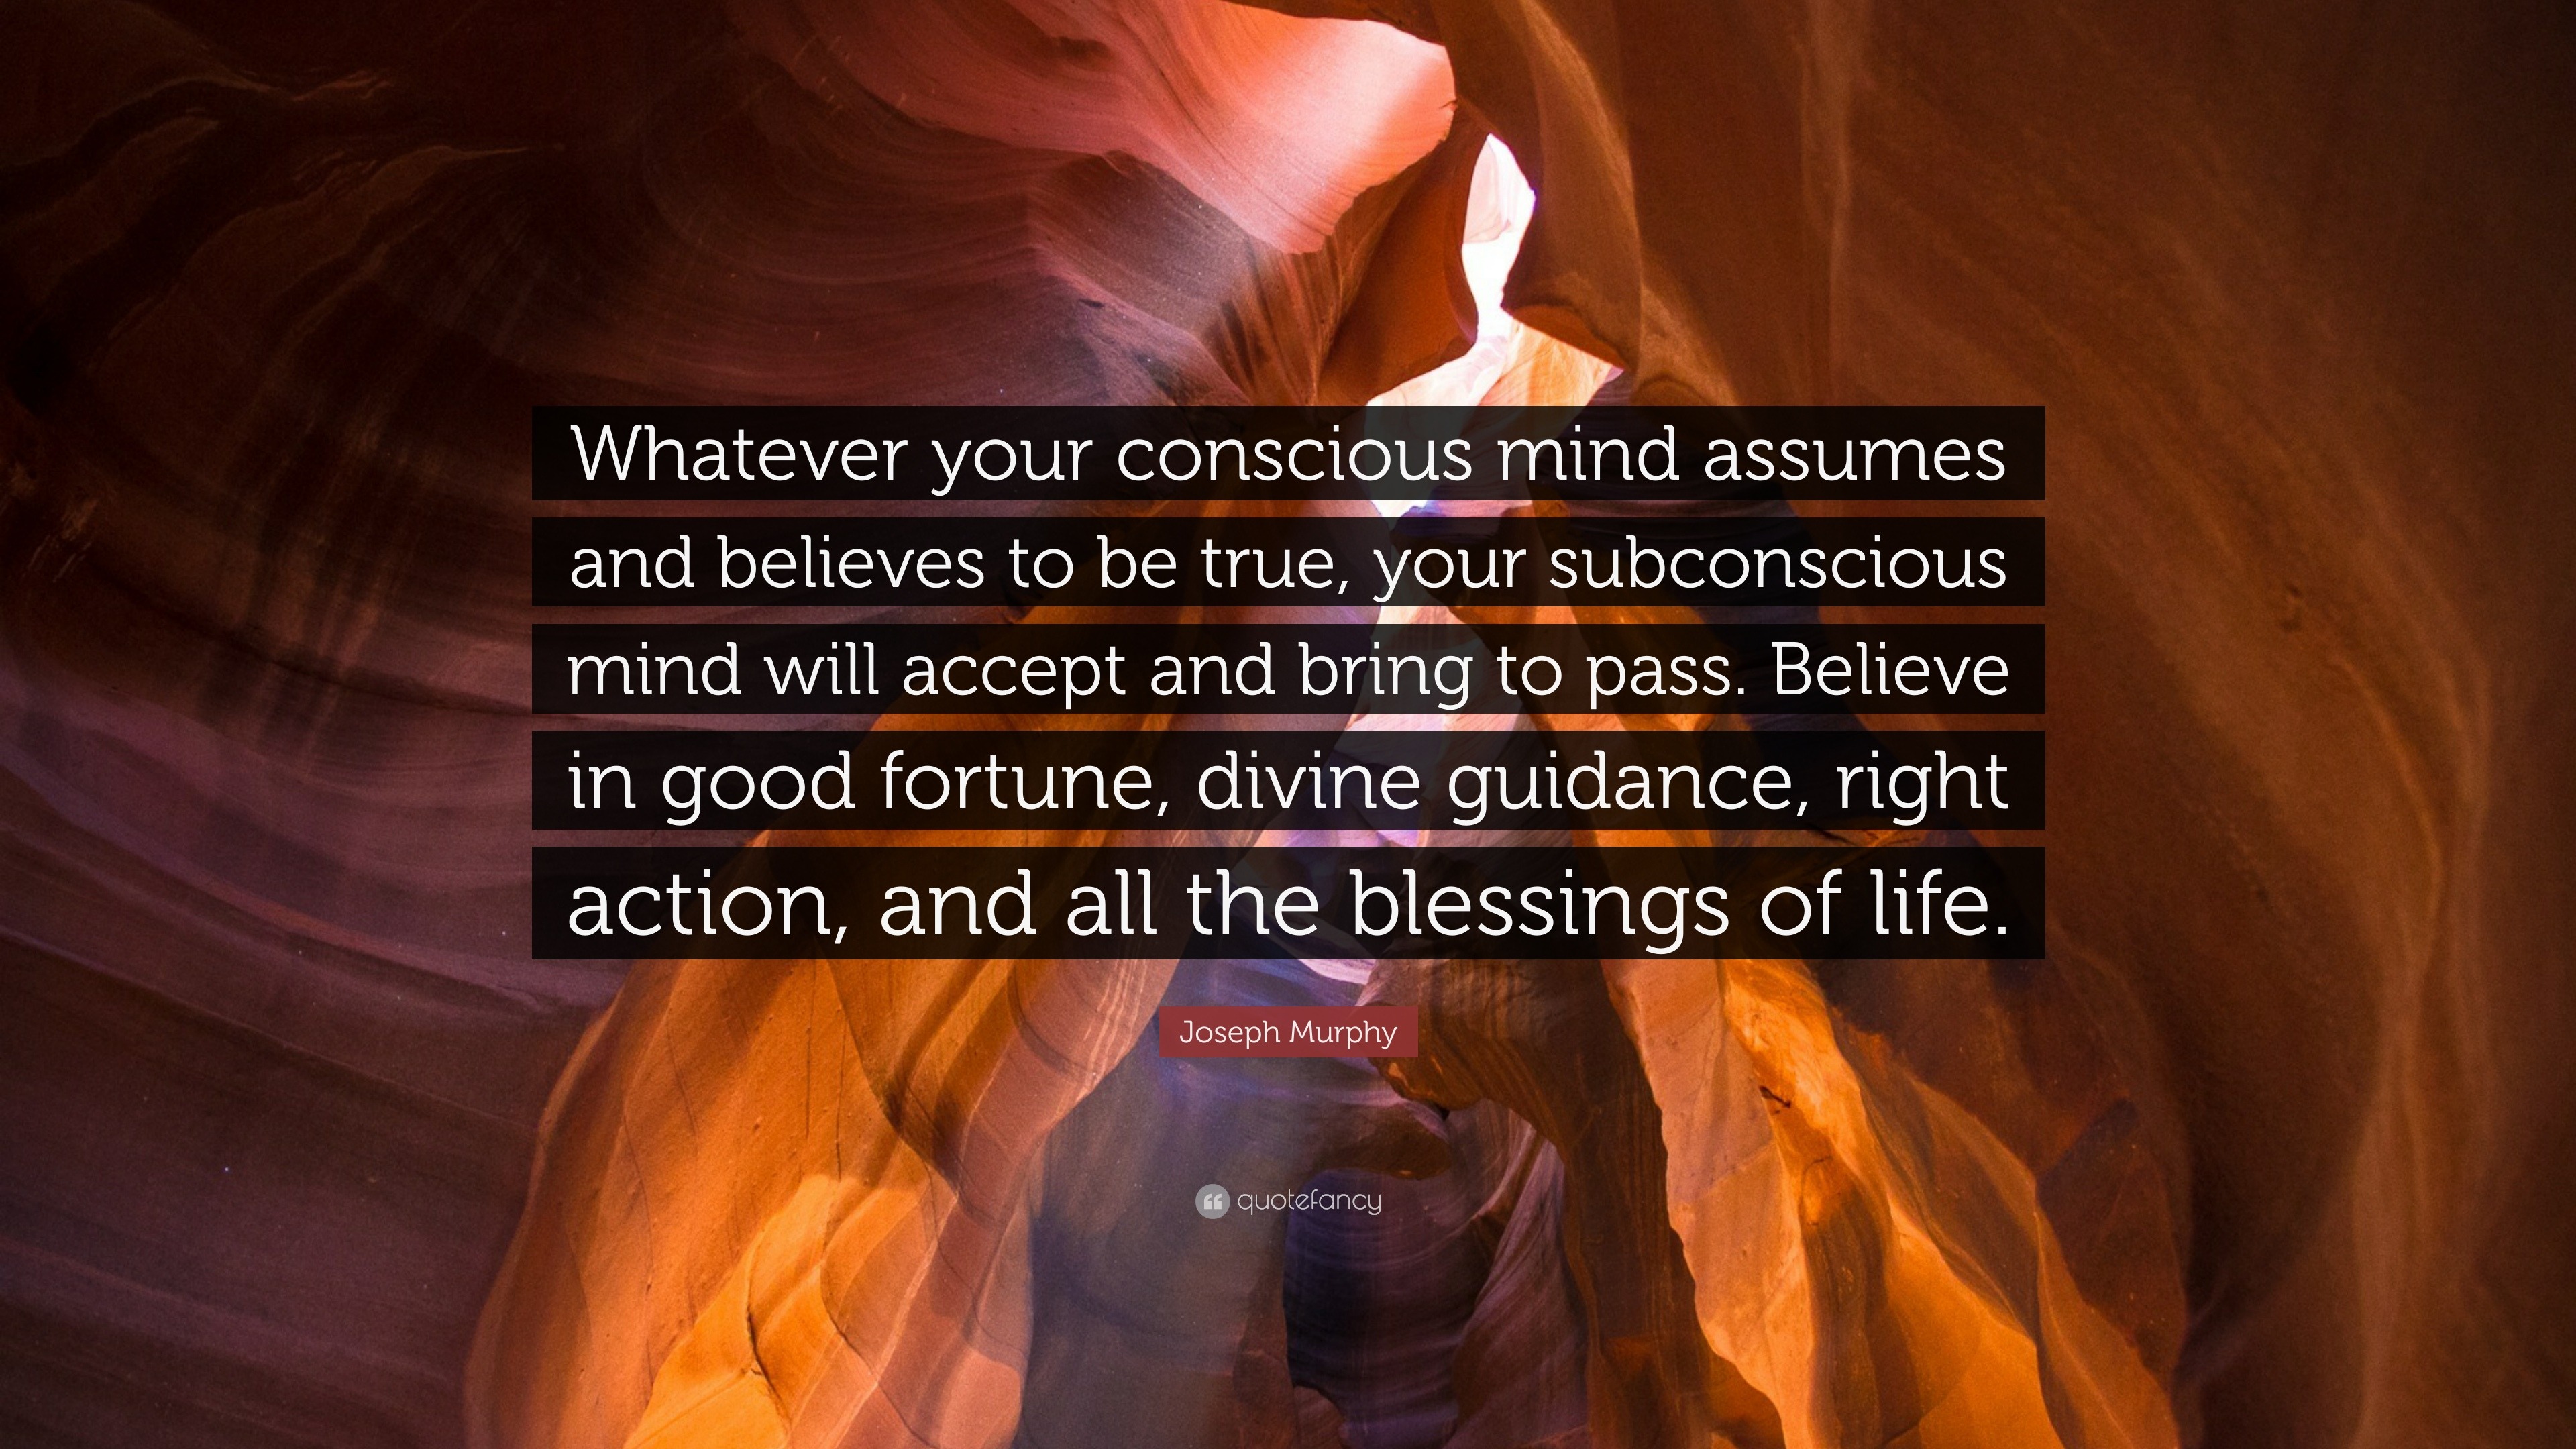 Joseph Murphy Quote “Whatever your conscious mind assumes and believes to be true